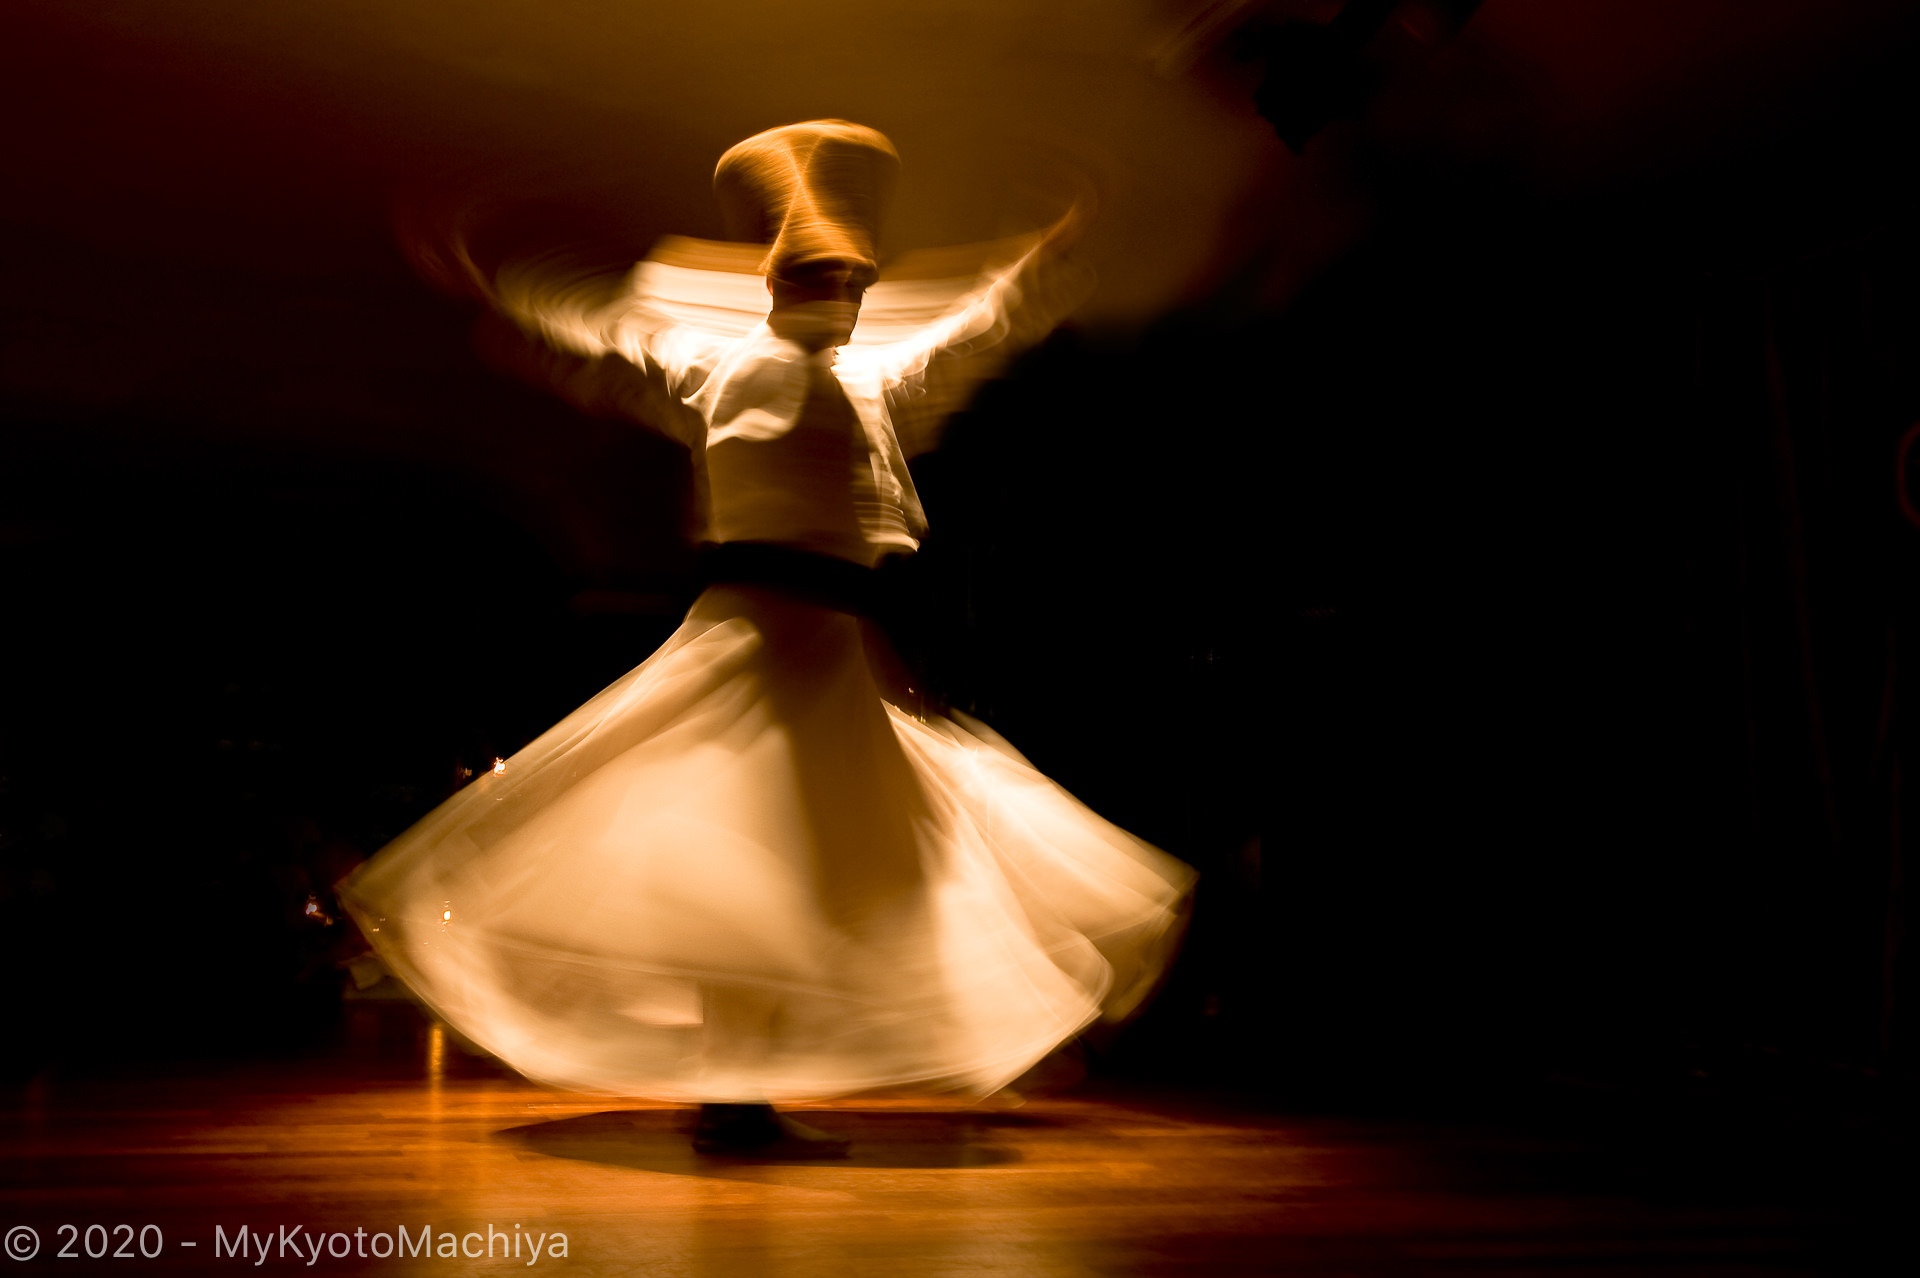 Mevlevi Sufi swirling dervishes, at a folkloric show, Istanbul, Turkey Oct 2008